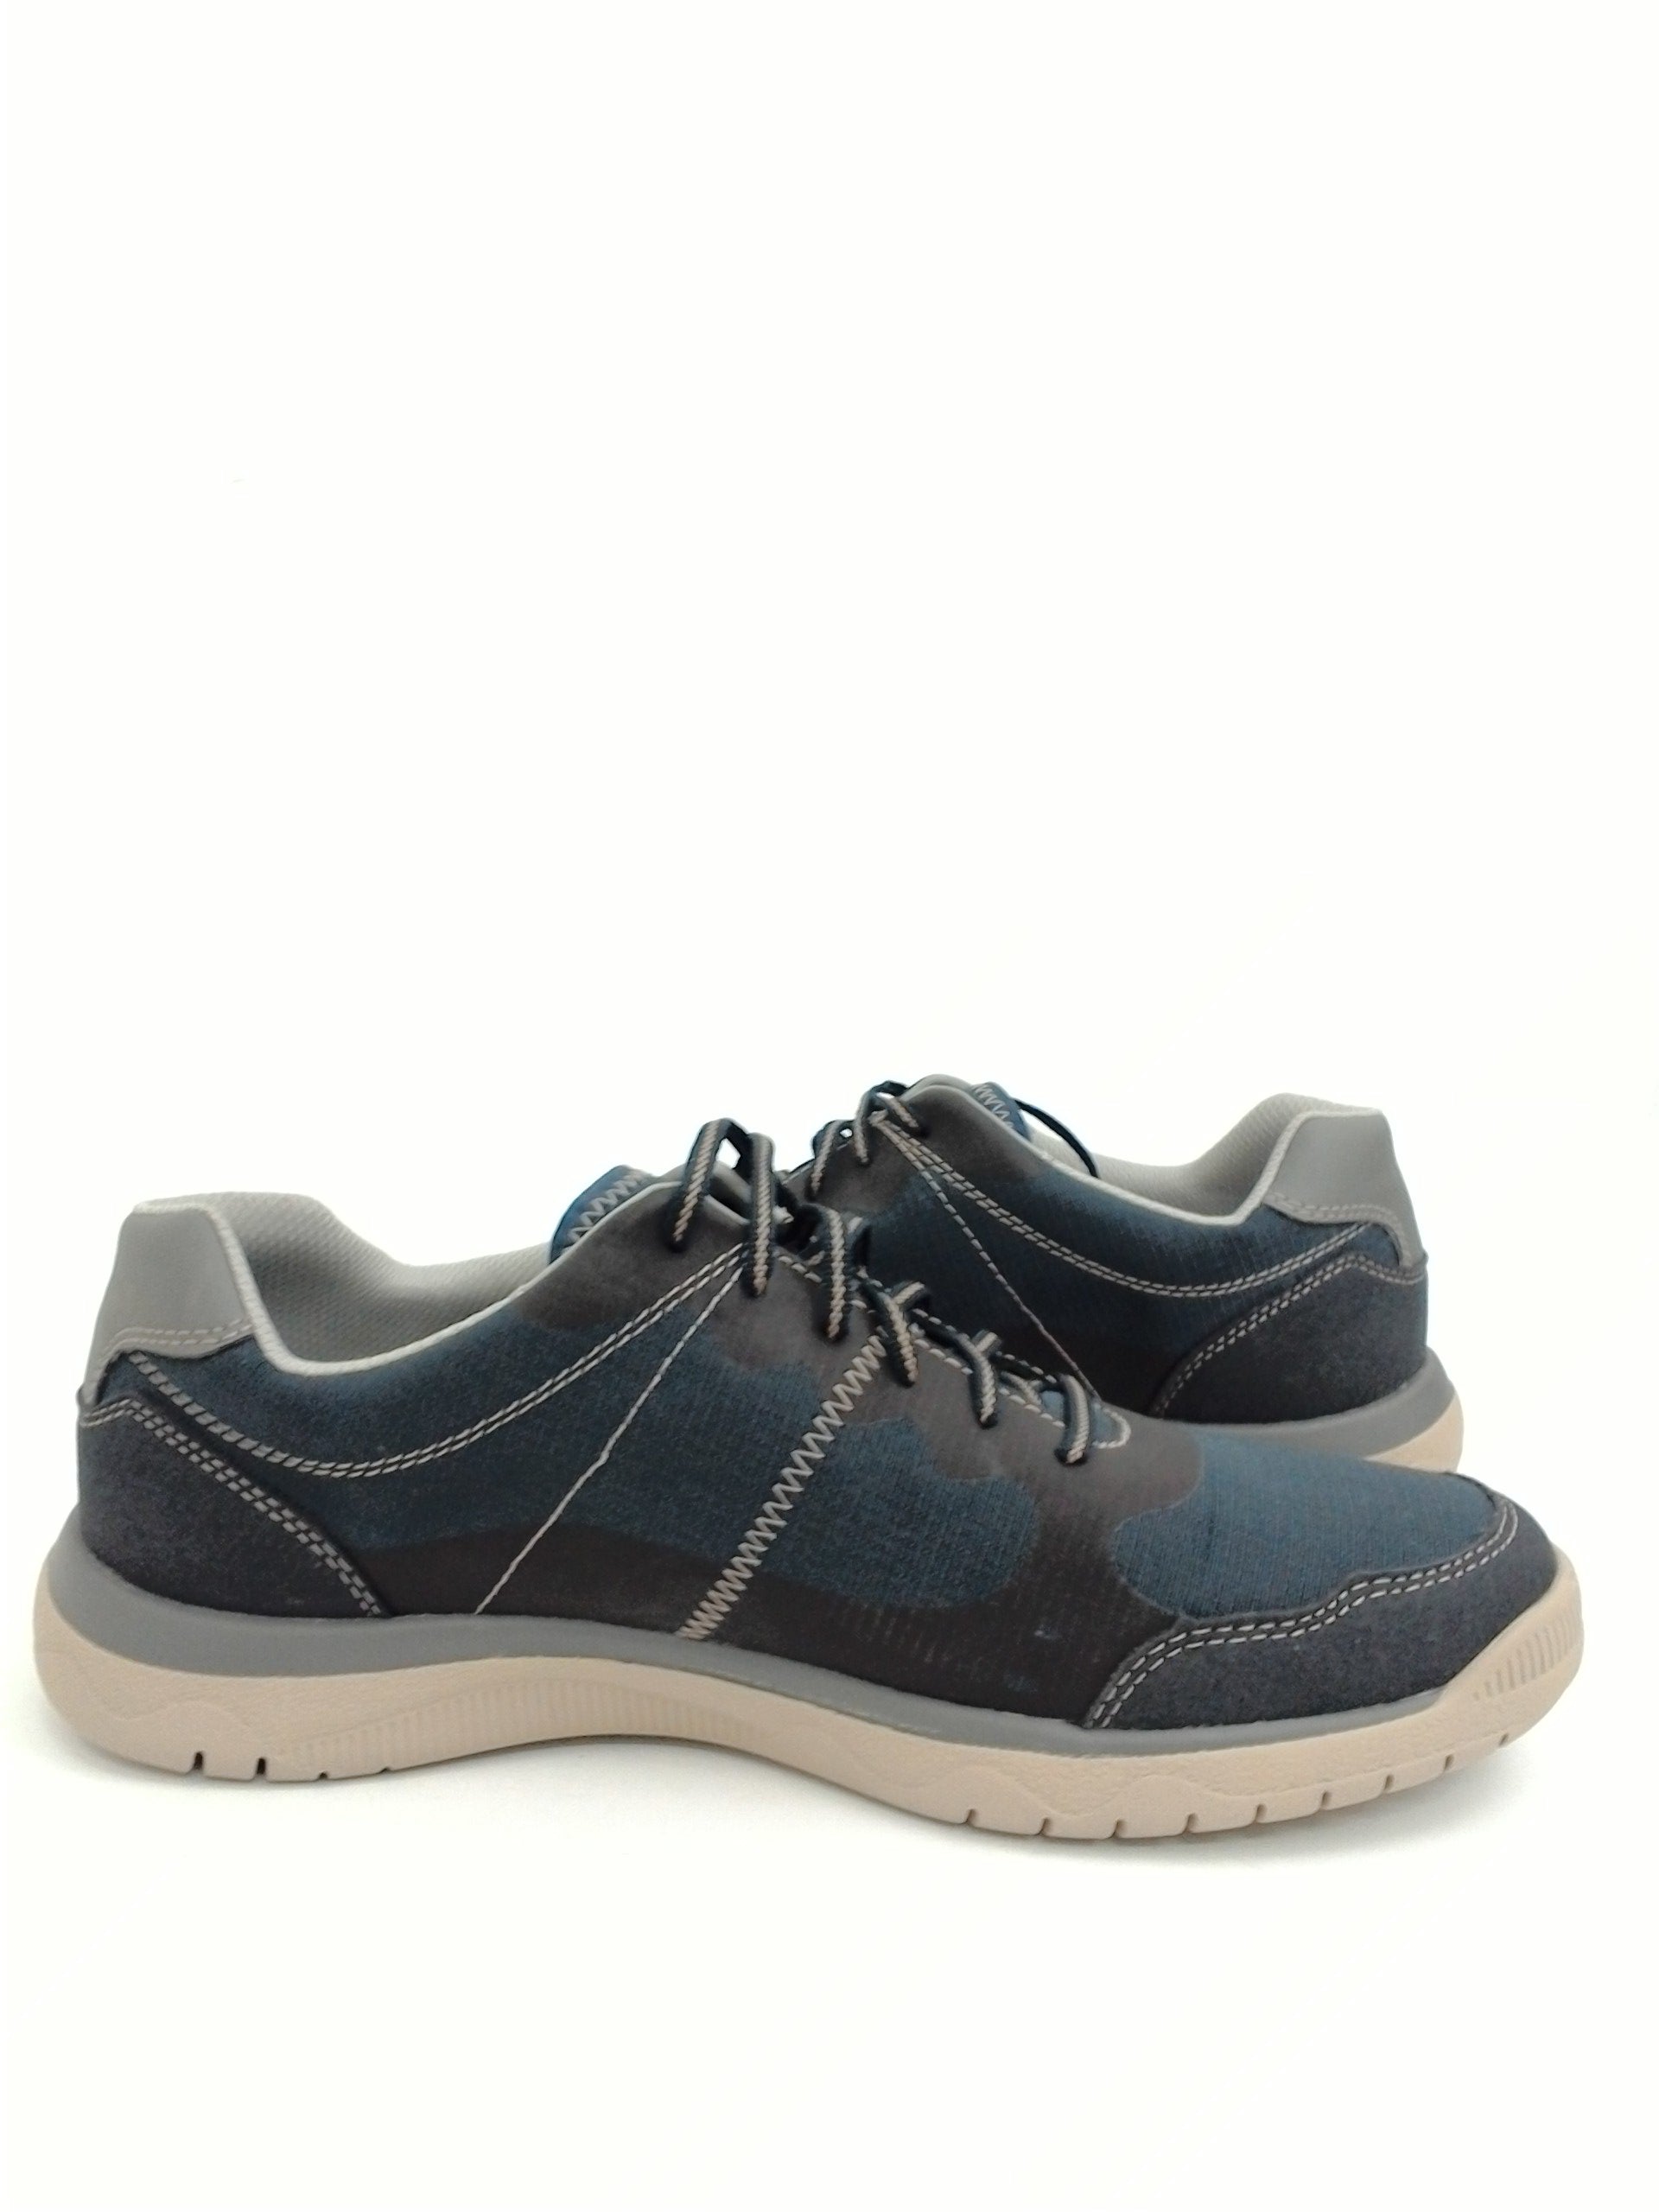 Clarks Men's Dark Blue/Grey/Black Sneakers Size 9.5 M - Prime Shoes and ...